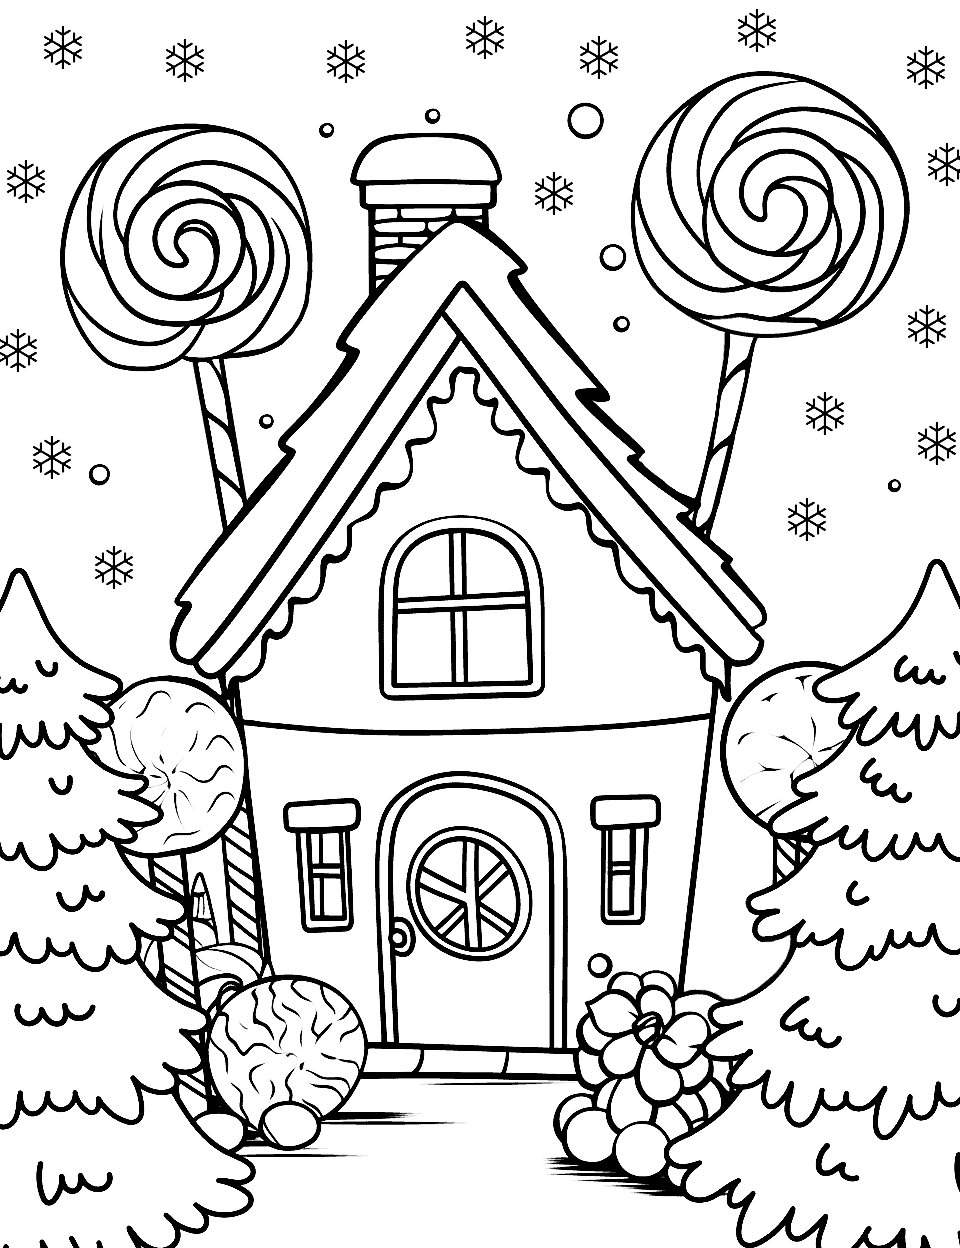 Christmas Candy Wonderland Coloring Page - A Christmas scene with a gingerbread house and candy canes.